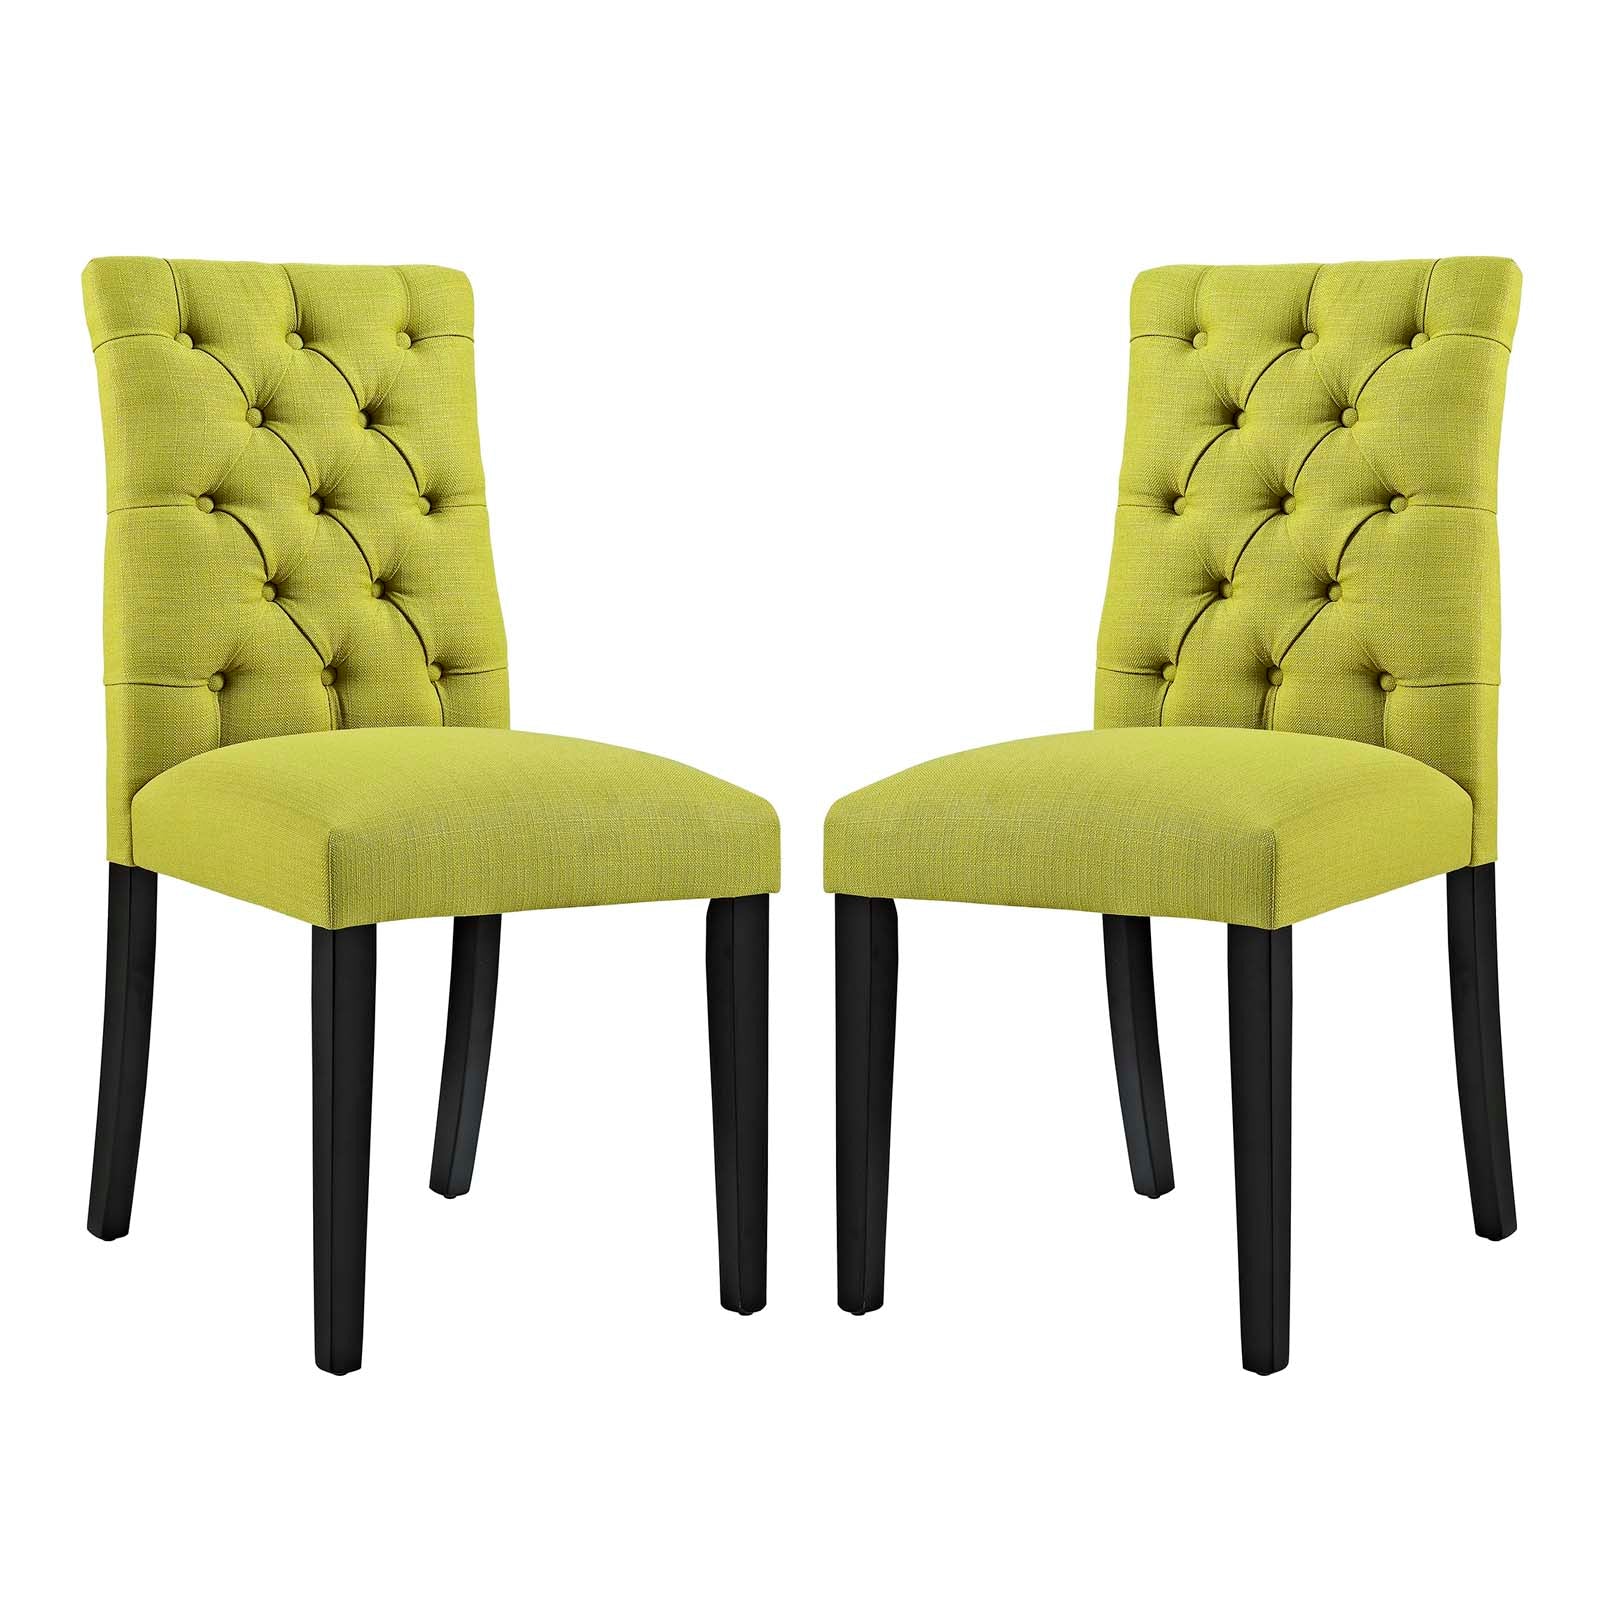 Modway Dining Chairs - Duchess Dining Chair Fabric Set of 2 Wheatgrass